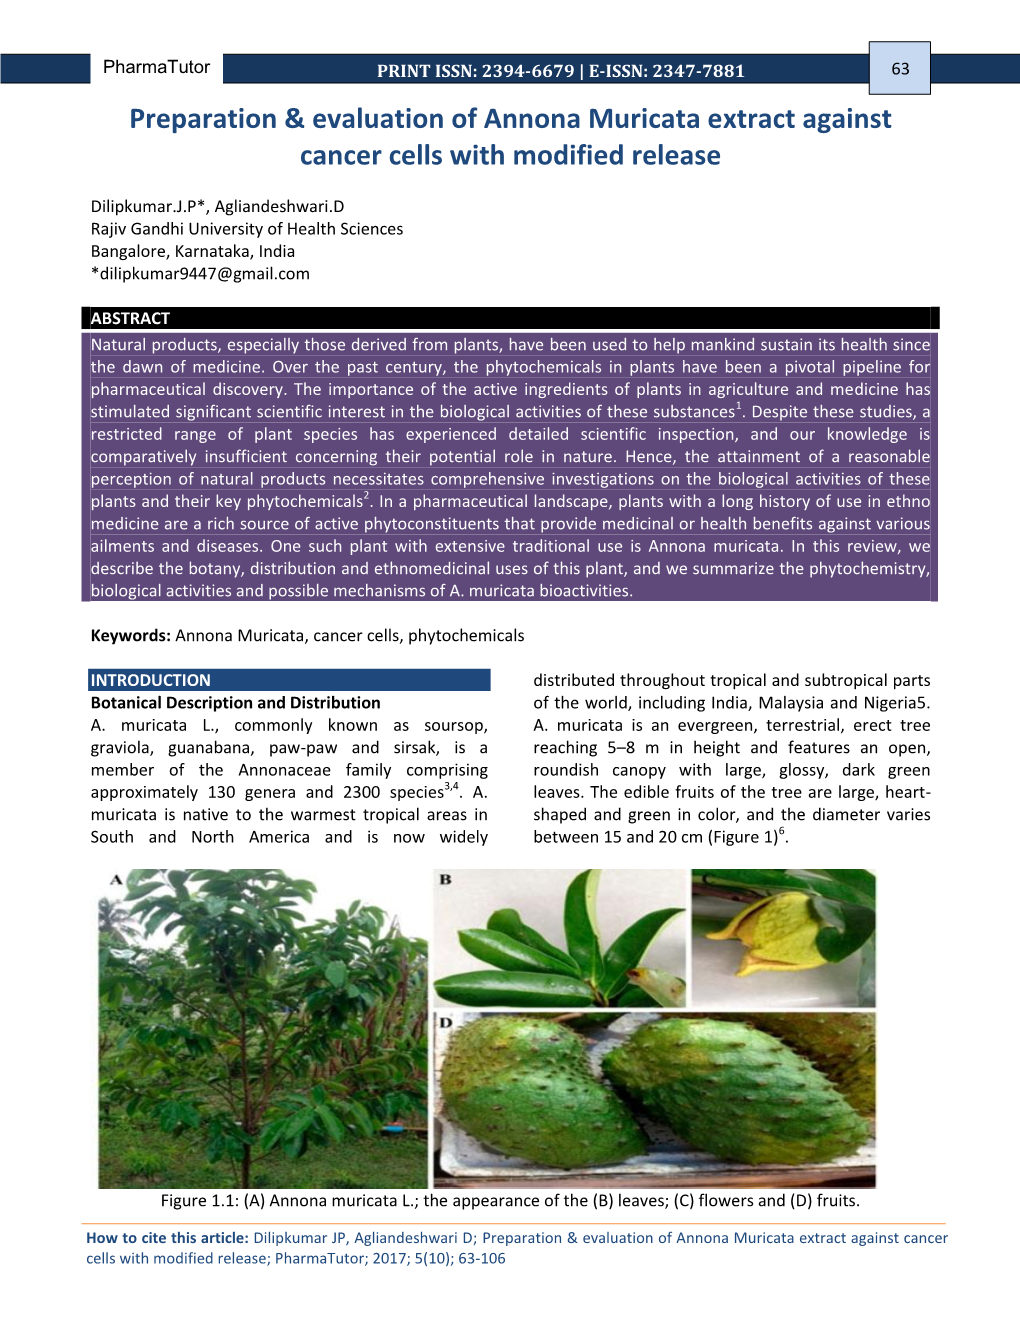 Preparation & Evaluation of Annona Muricata Extract Against Cancer